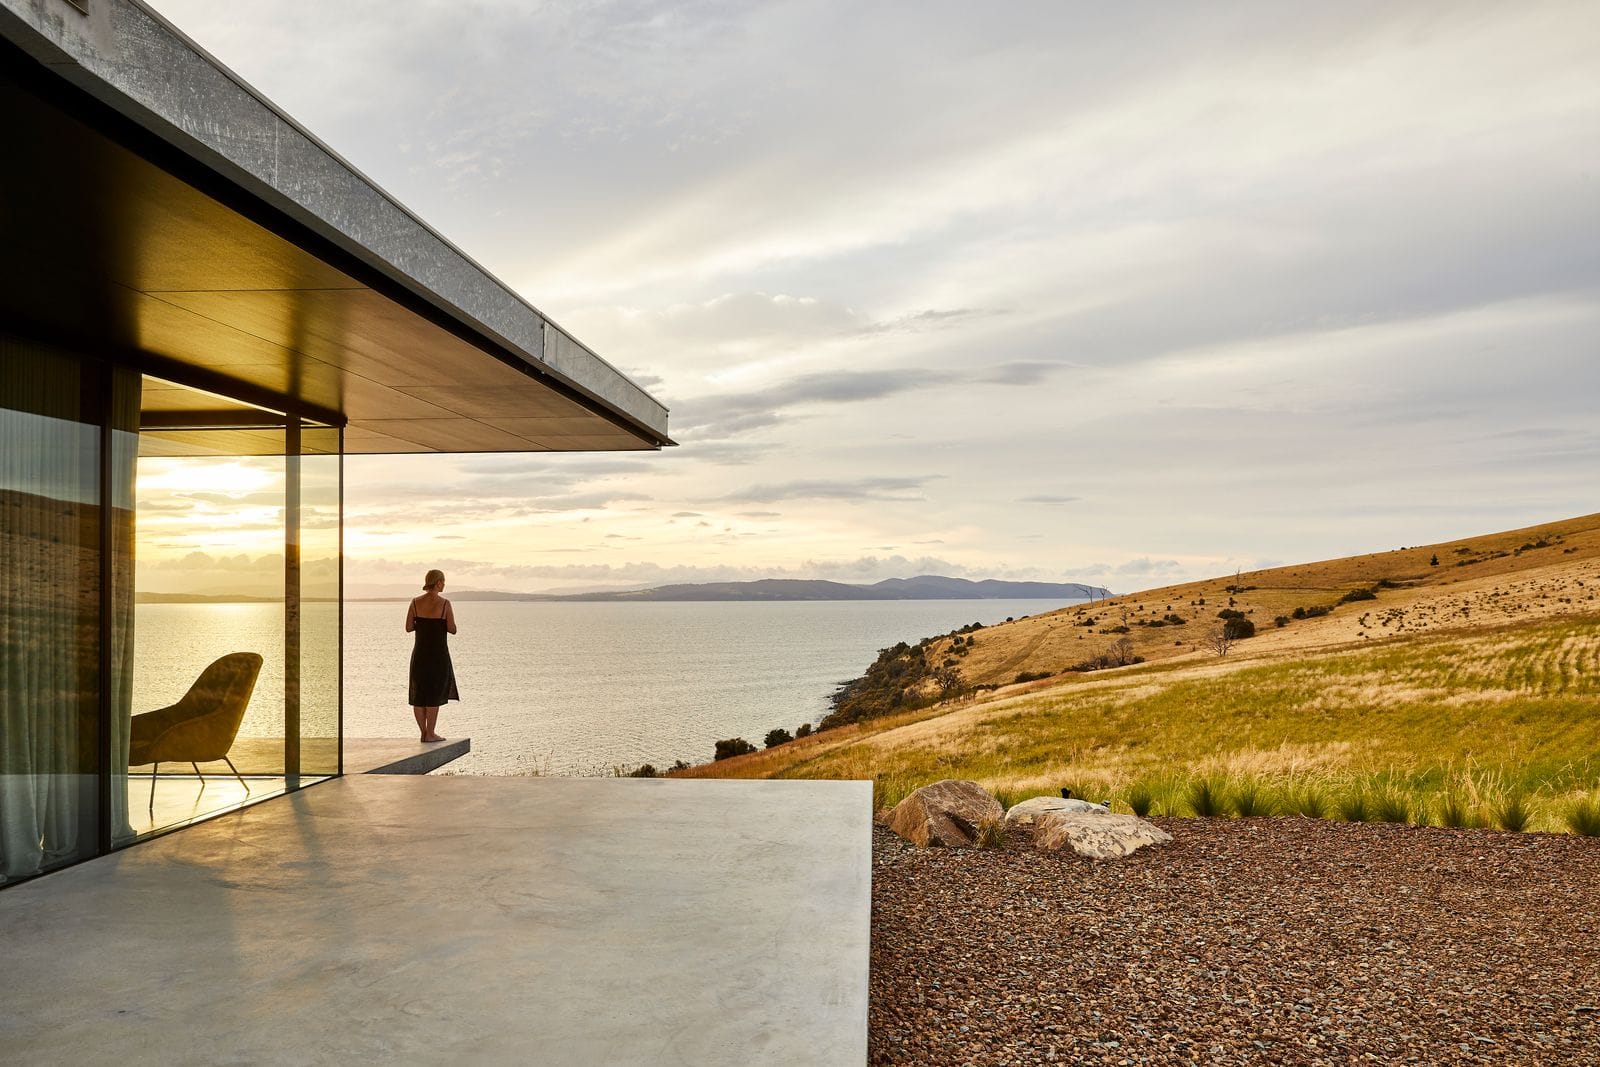 The Point Tasmania showing the ocean outlook at sunset and the concrete house in the foreground